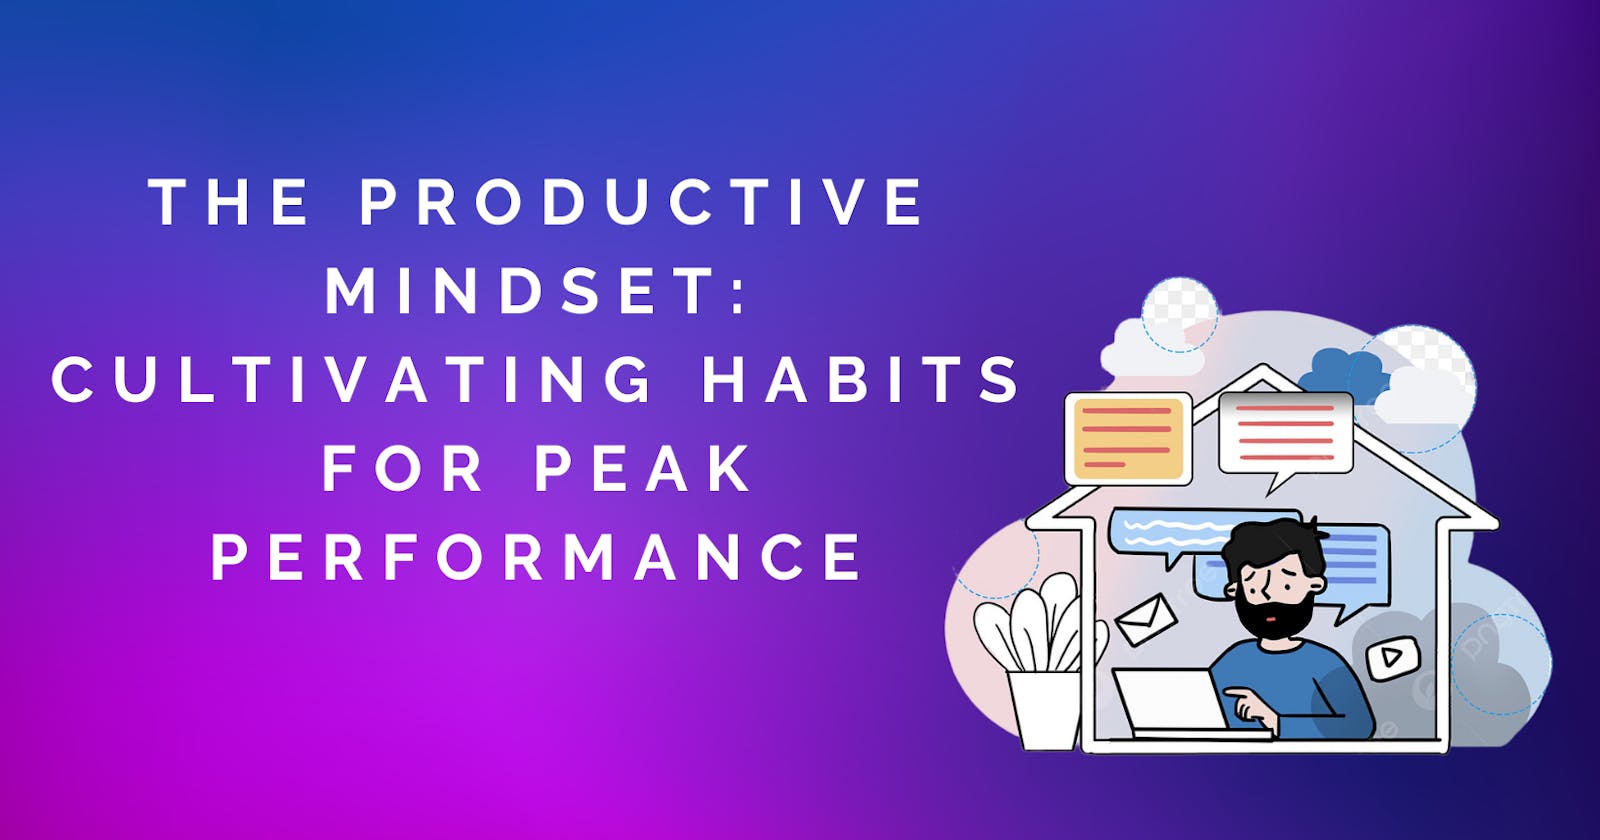 The Productive Mindset: Cultivating Habits for Peak Performance